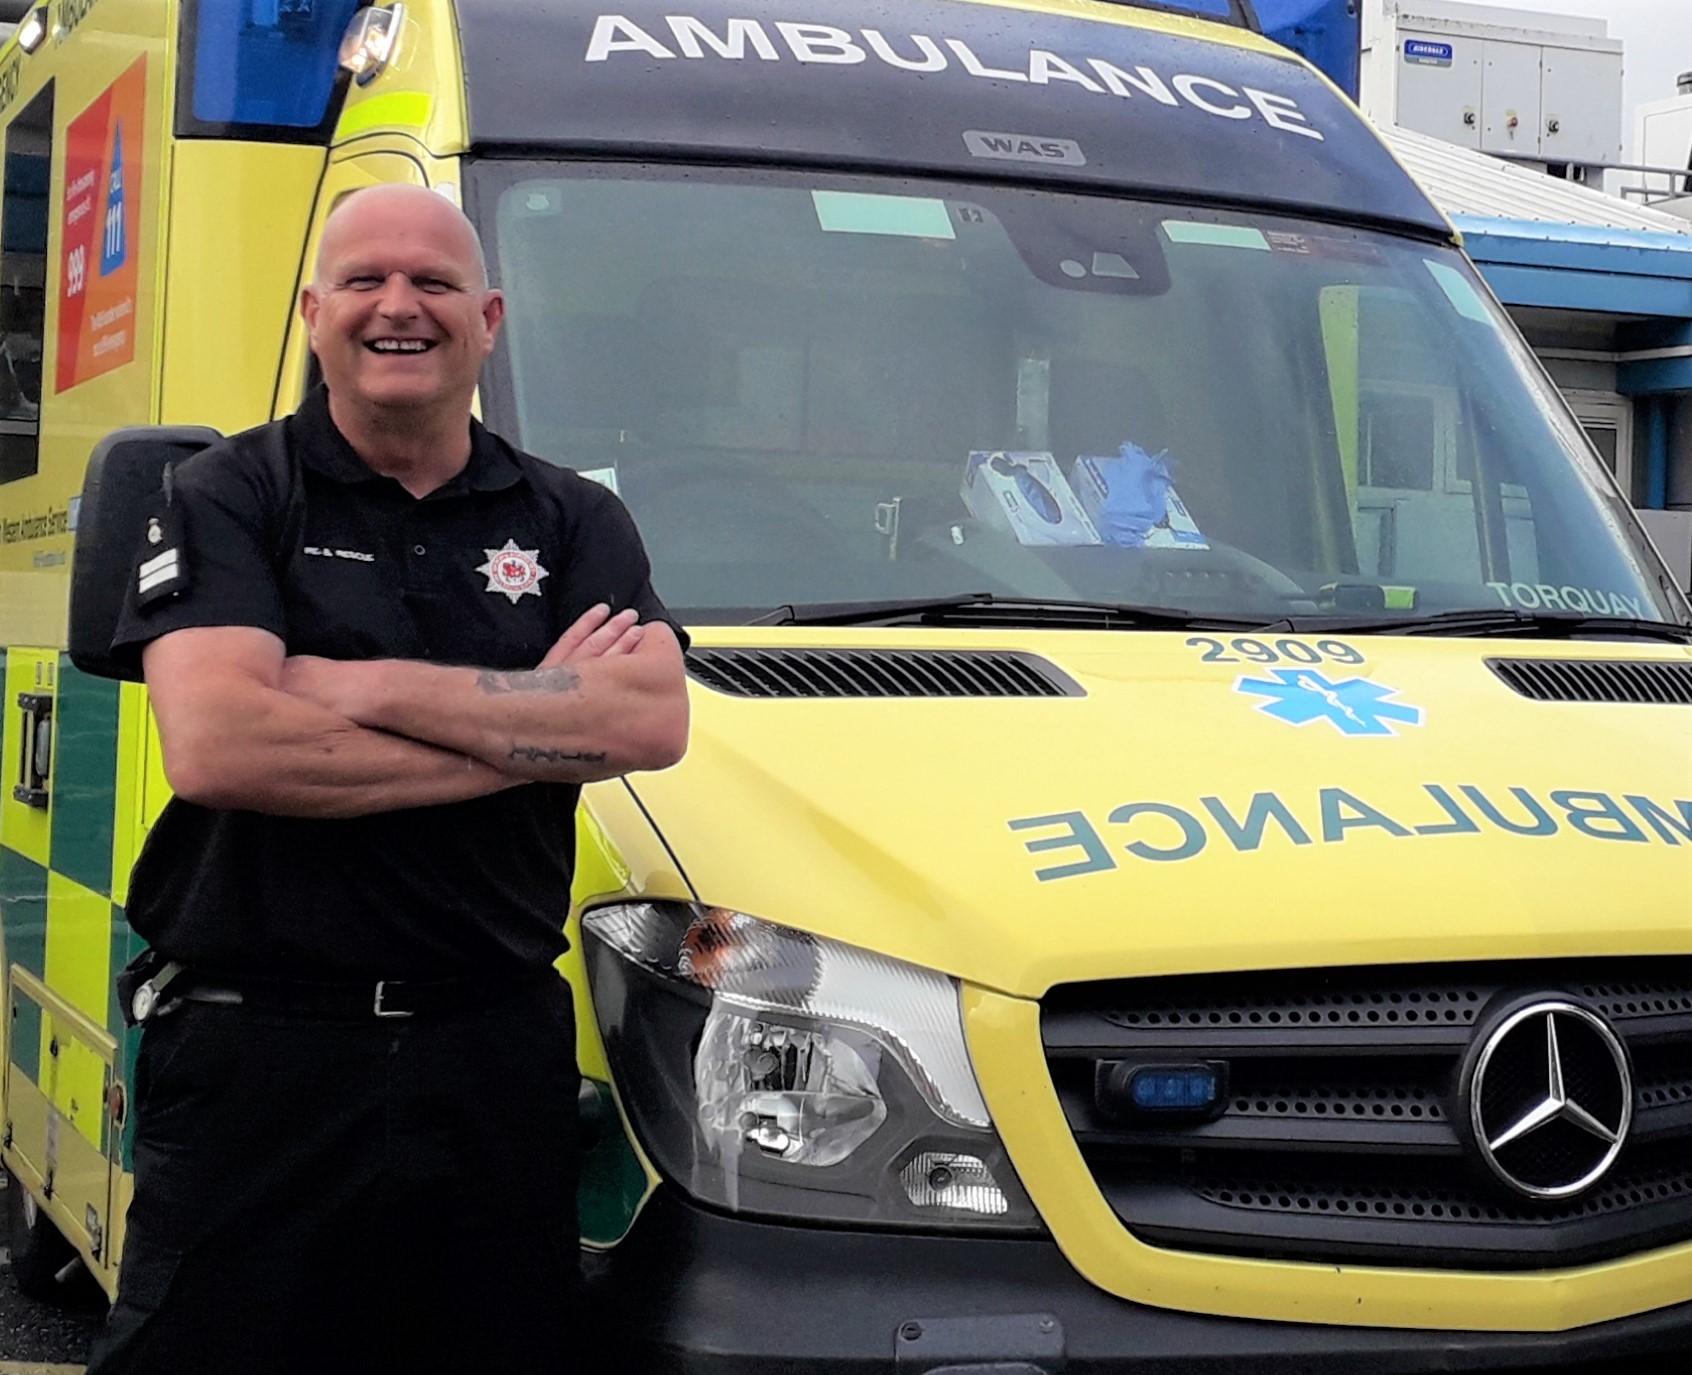 Our firefighter Kevin stood in front of an ambulance with his arms folded, smiling. He is in his fire service uniform (a black top with the logo and black trousers).